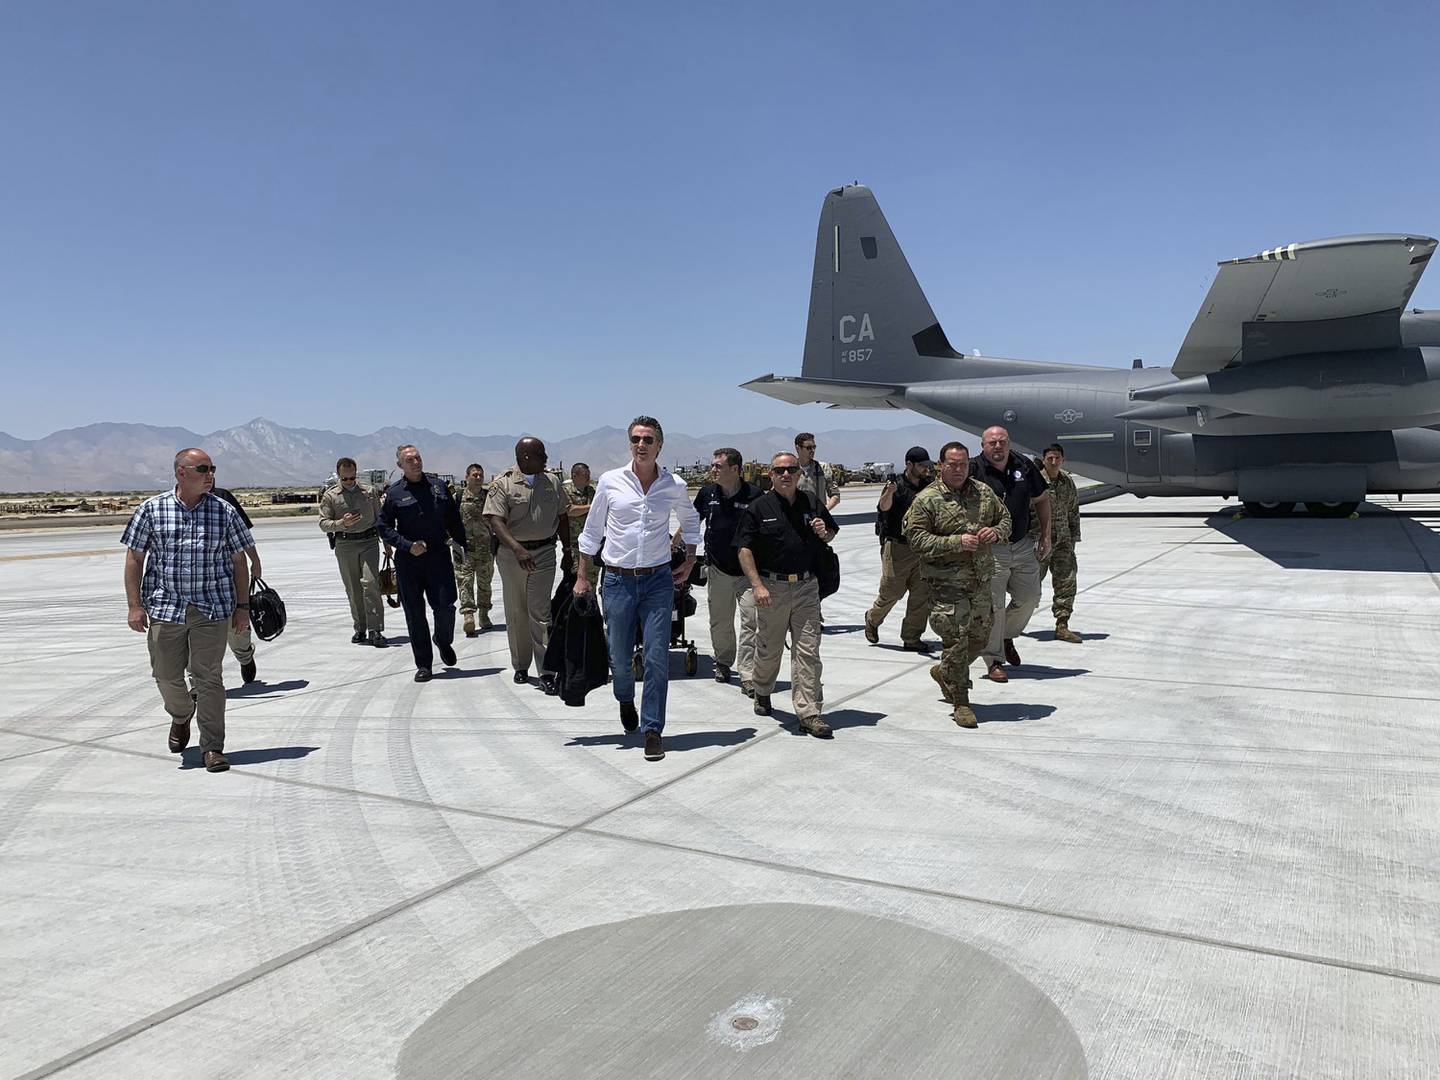 Gov. Gavin Newson, center, arrives with state leadership on the ground in Kern County on July 6, 2019, on his way to assess damages and meet with local responders on the series of major shaking in the city of the Ridgecrest, Calif.